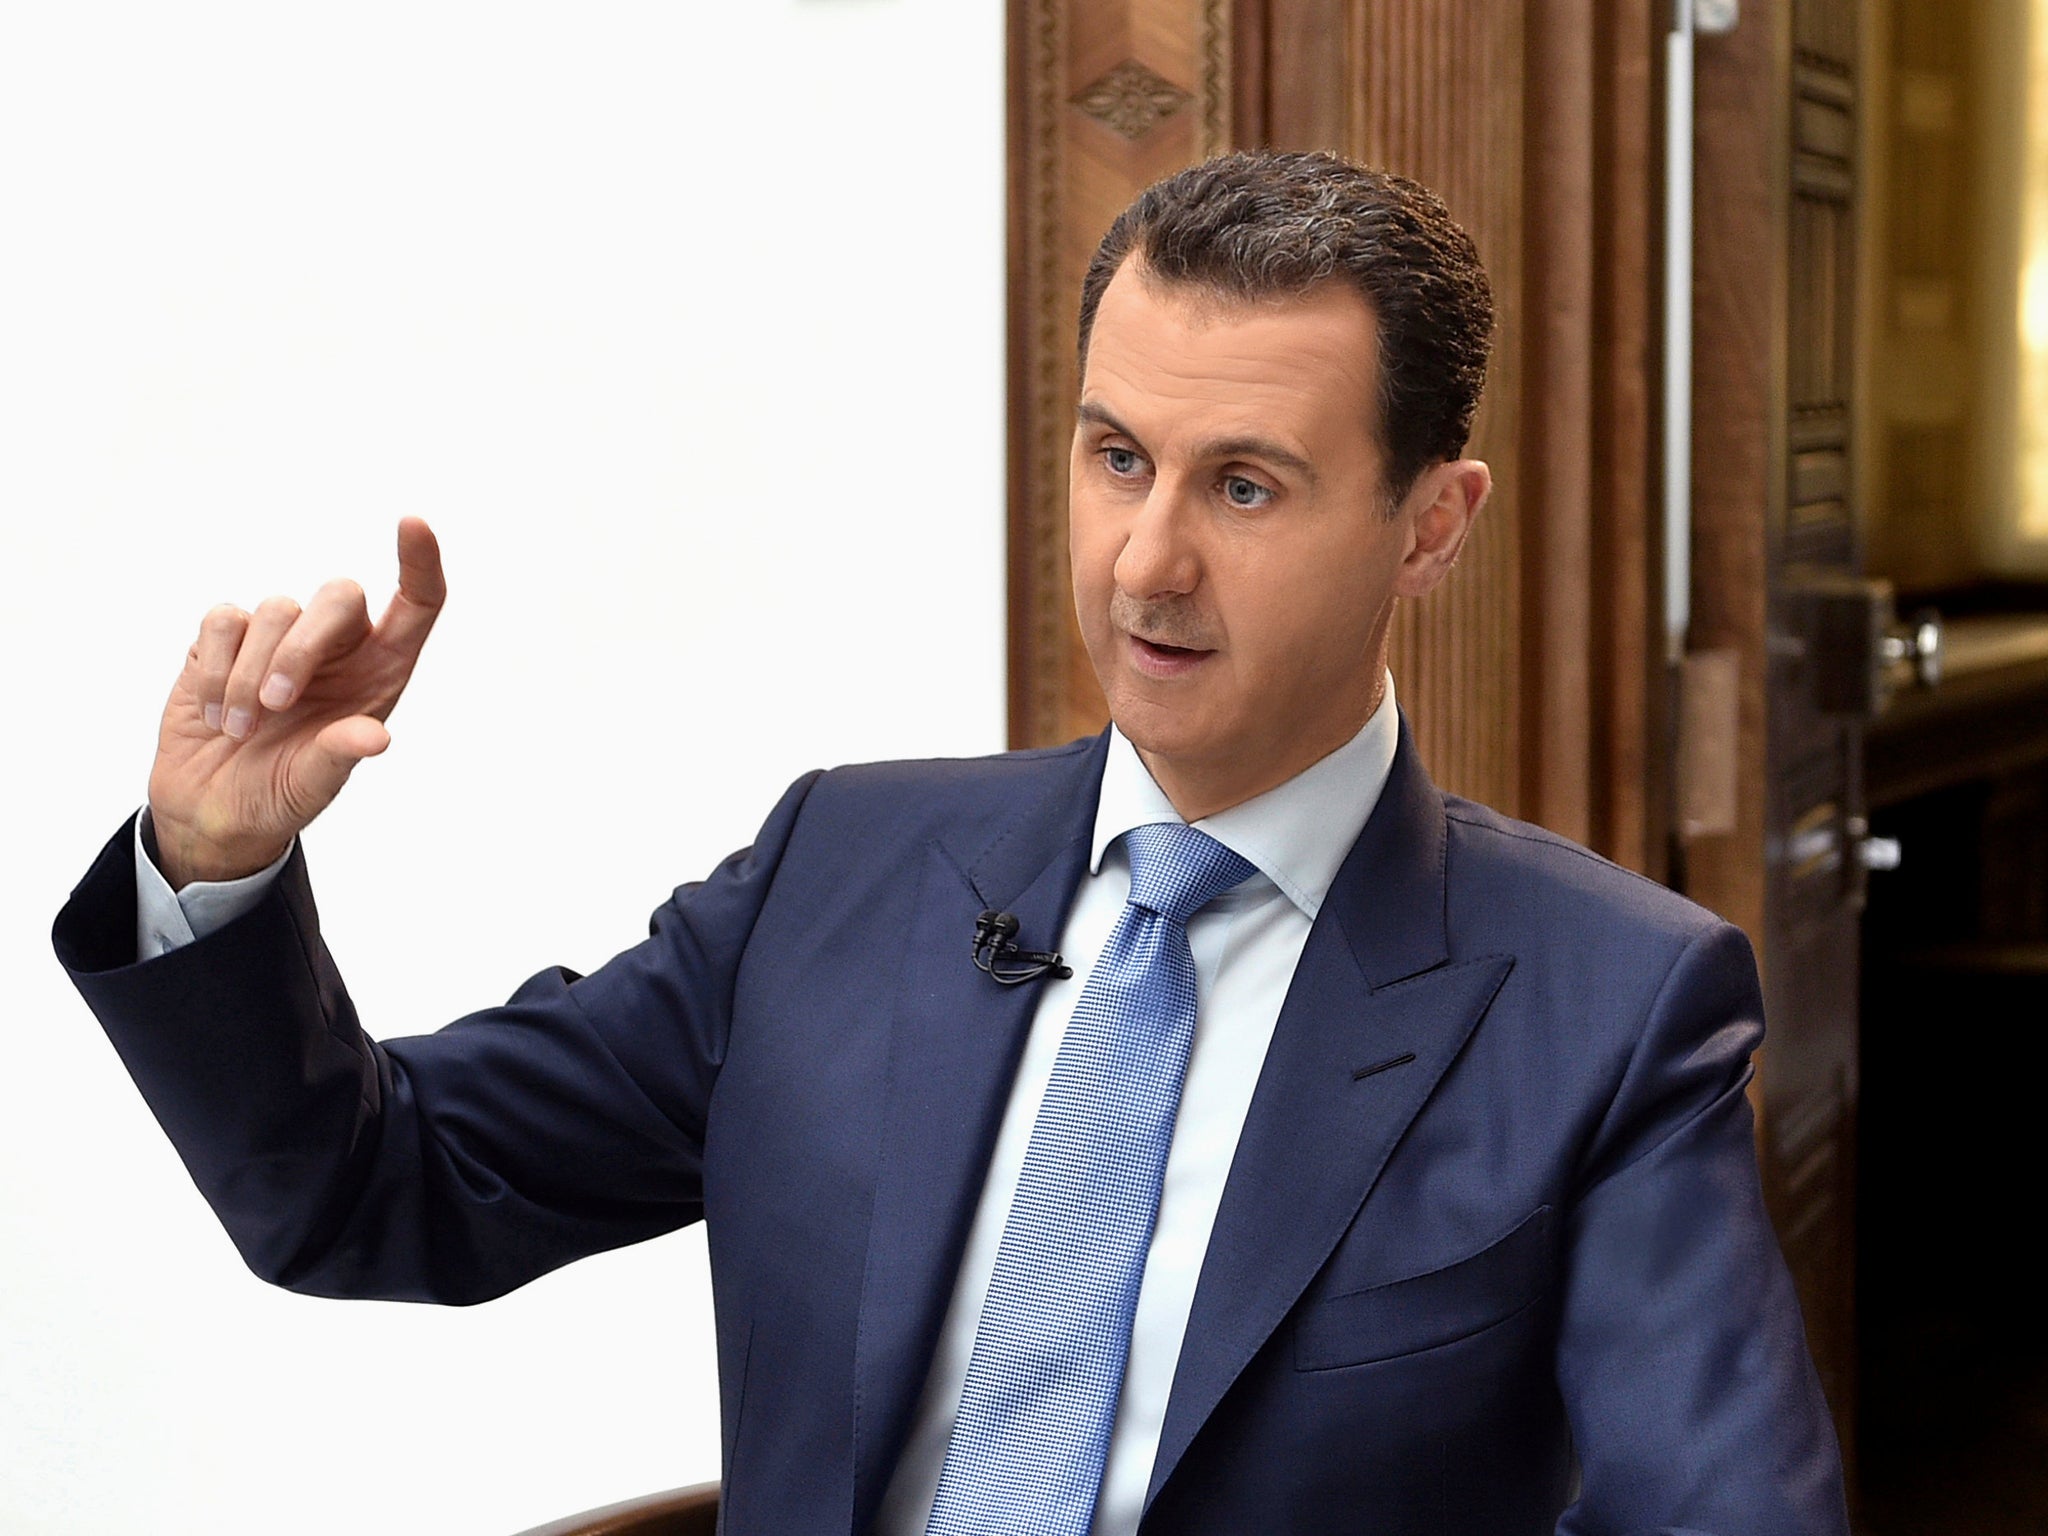 Syria's President Bashar al-Assad has managed to militarily gain the upoer hand in Syria's civil war thanks to firepower provided by allies in Moscow and Tehran